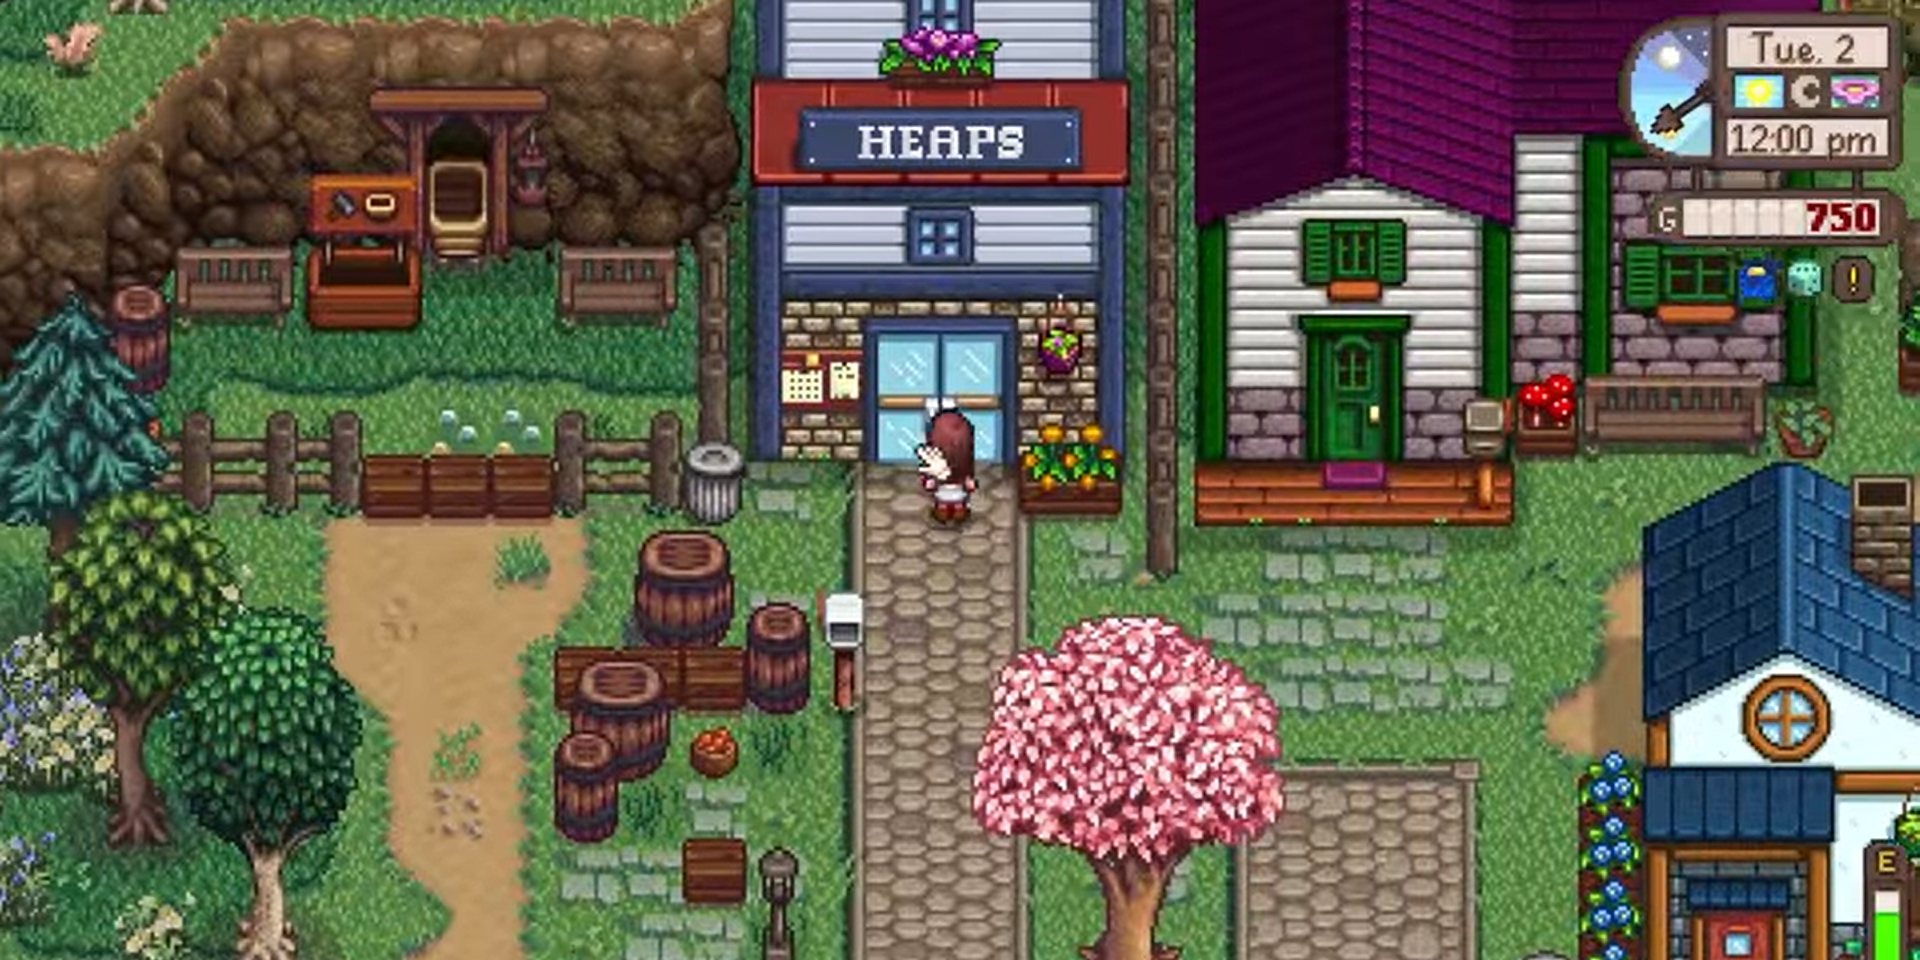 A photo of Heap's Convenience Store in Ridgeside Village (Centered). To the left, a minecart with a special items box beside it. To the right, a residential building.